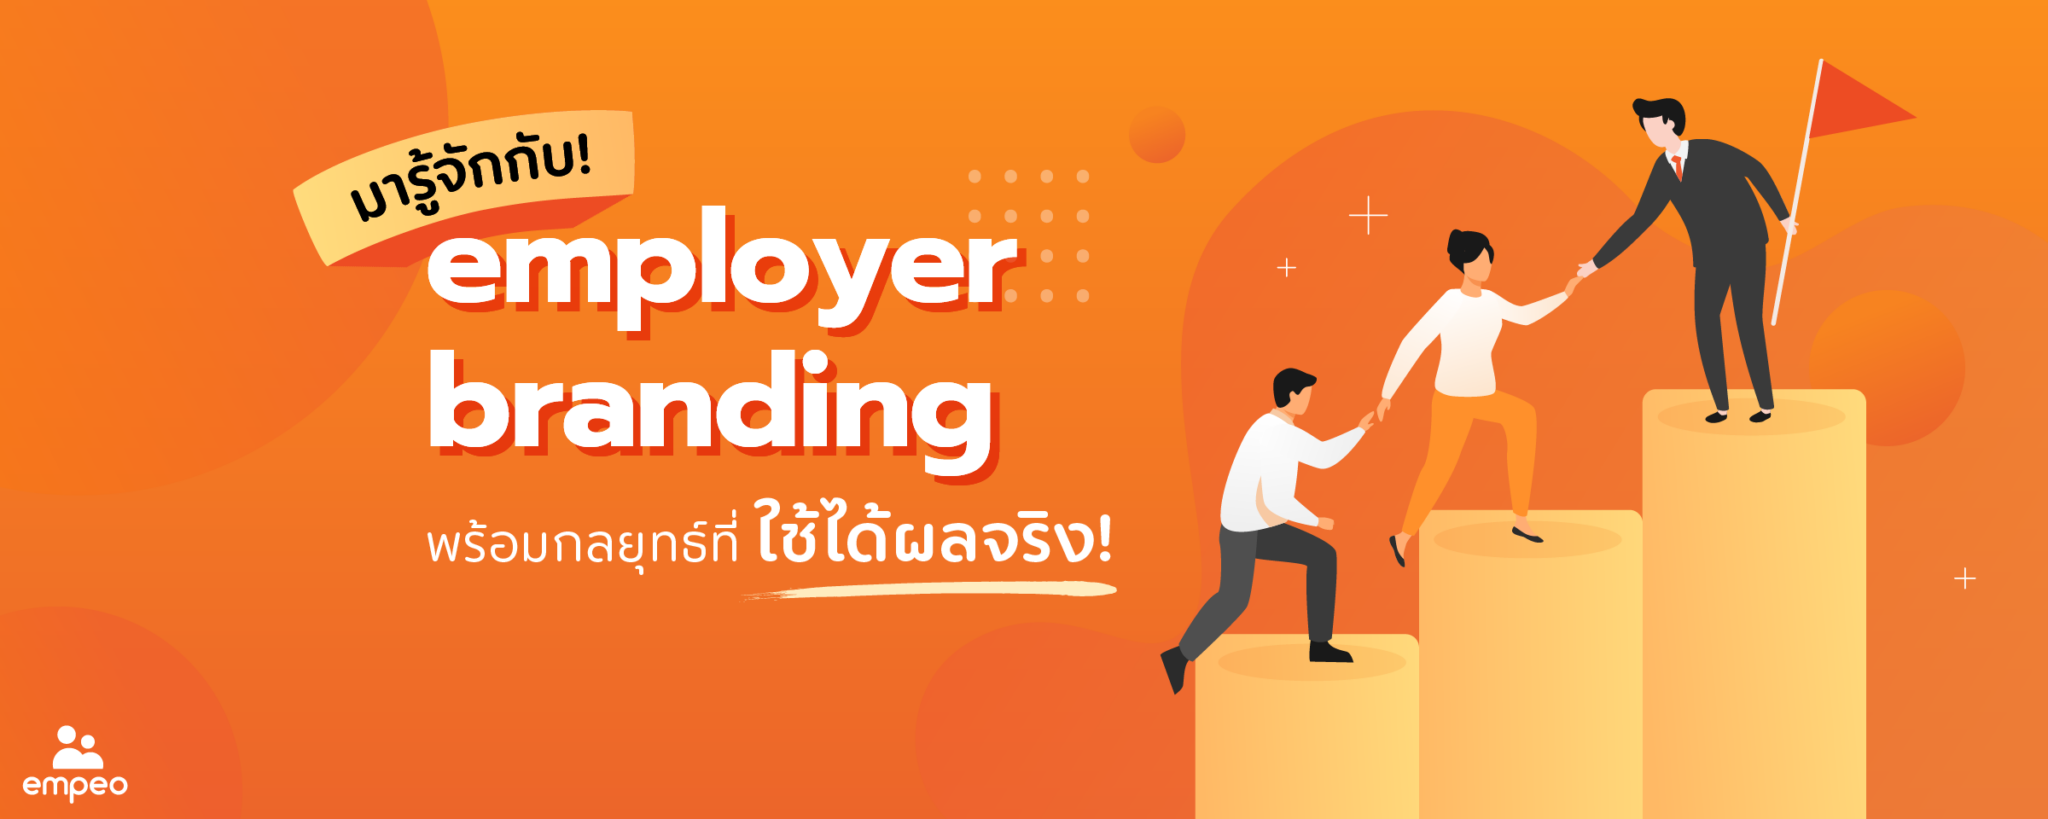 employer branding text with mock up